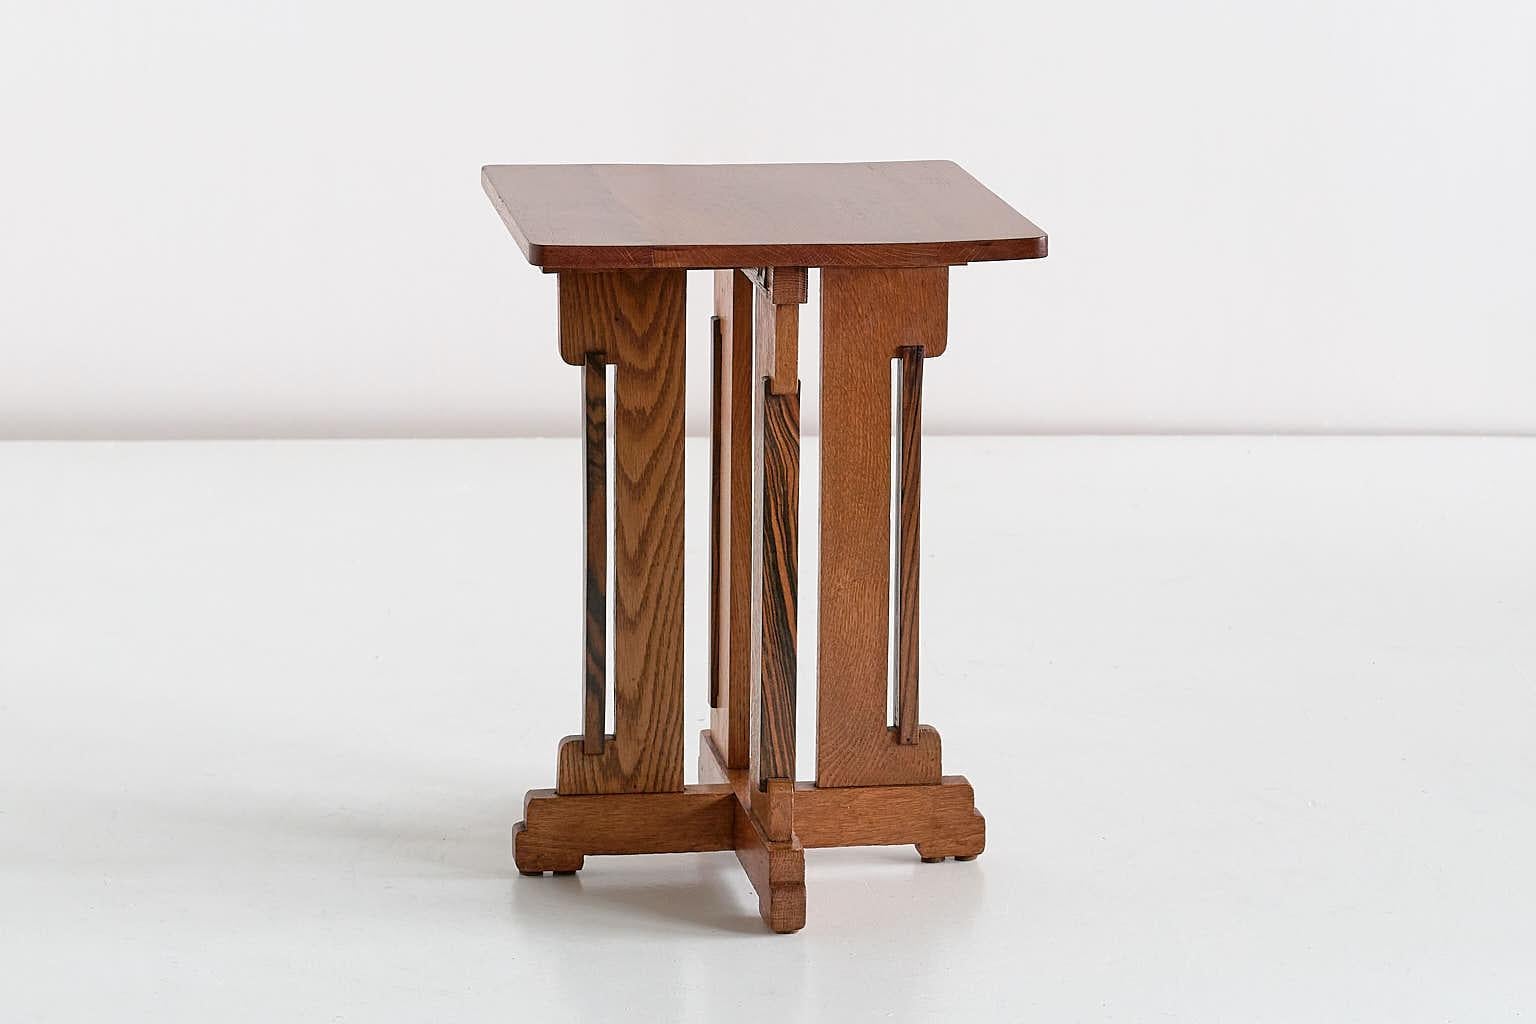 This rare side table was designed by P.E.L. Izeren and produced by the Dutch company Genneper Molen in 1930. The frame and top are made of solid oak, with four contrasting side slats in Macassar Ebony wood. The geometric, tiered base and the